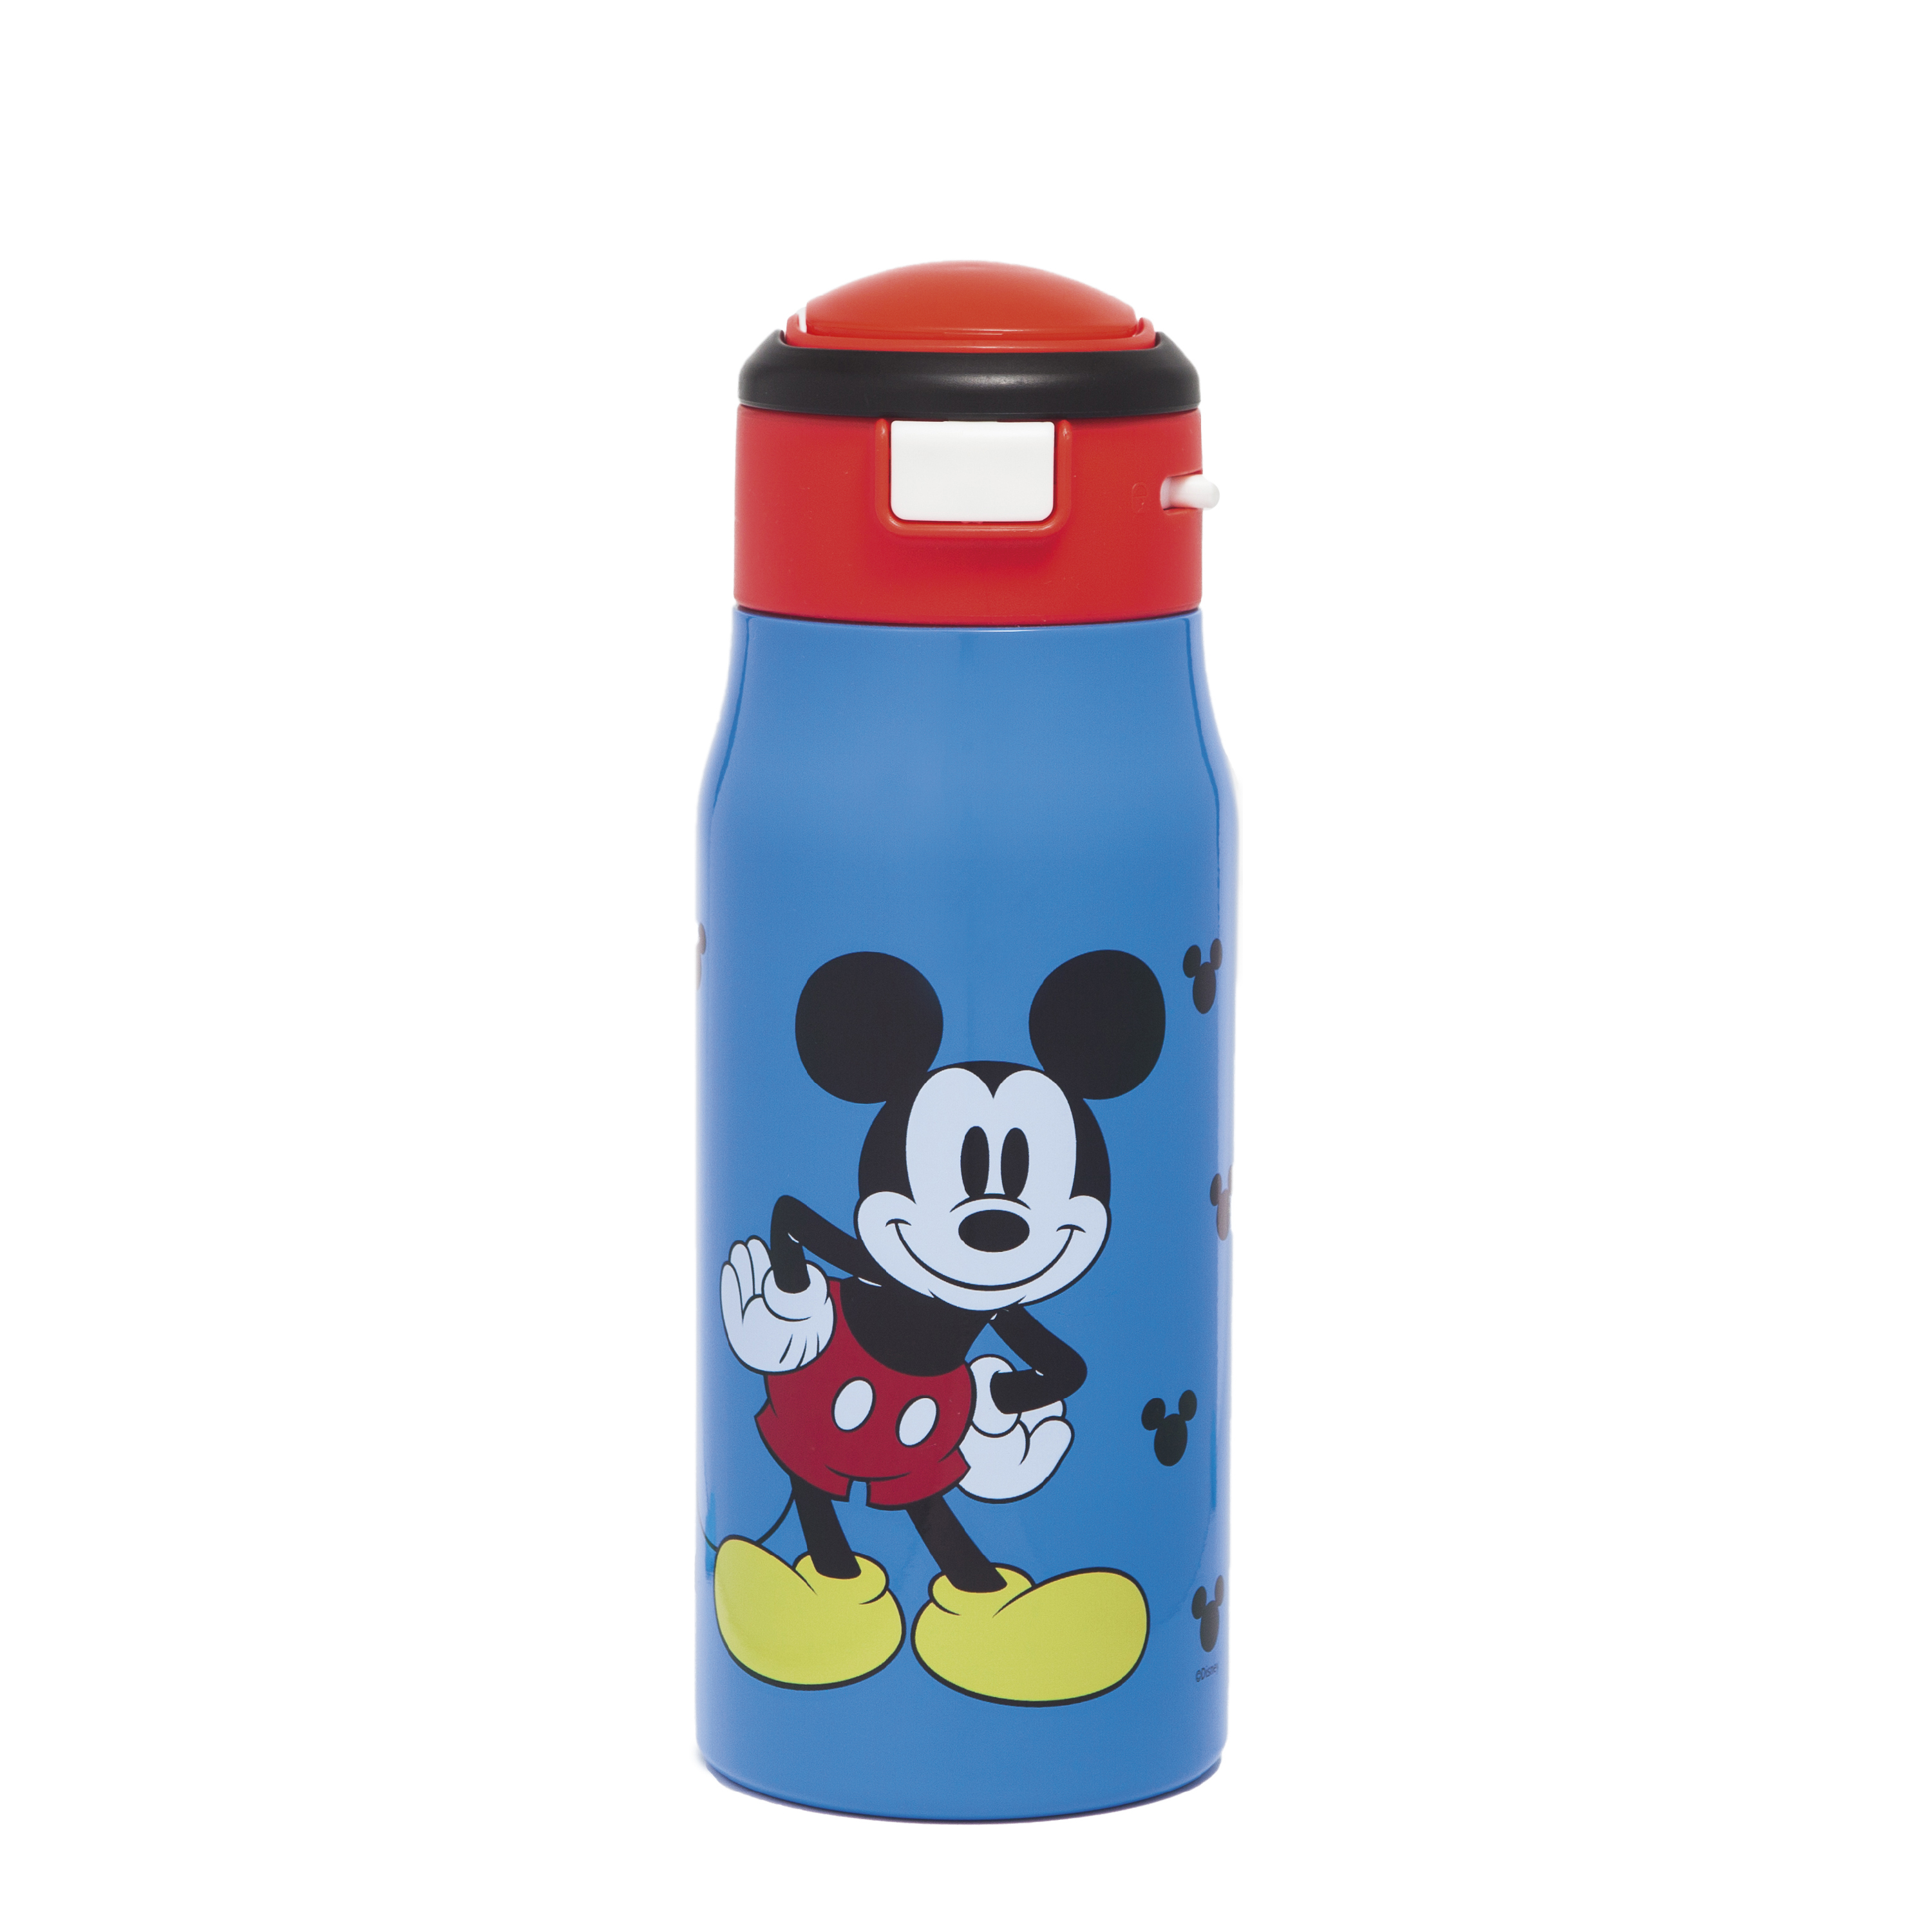 Disney 13.5 ounce Mesa Double Wall Insulated Stainless Steel Water Bottle, Mickey Mouse slideshow image 1